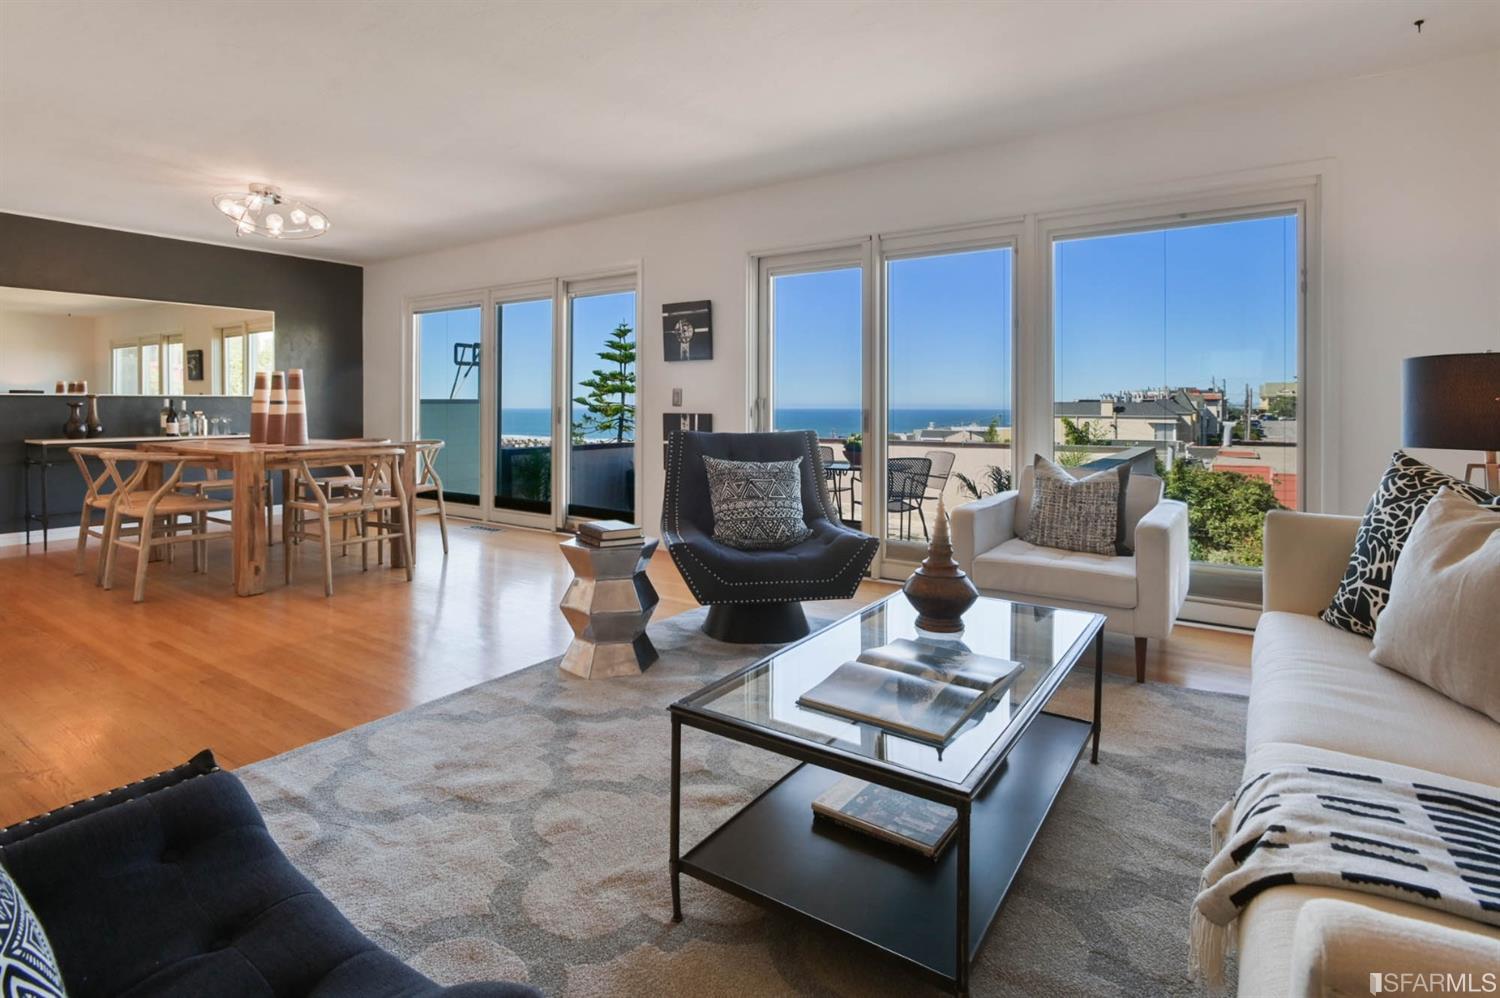 Living room / dining room with direct access to private patio and fabulous ocean views!